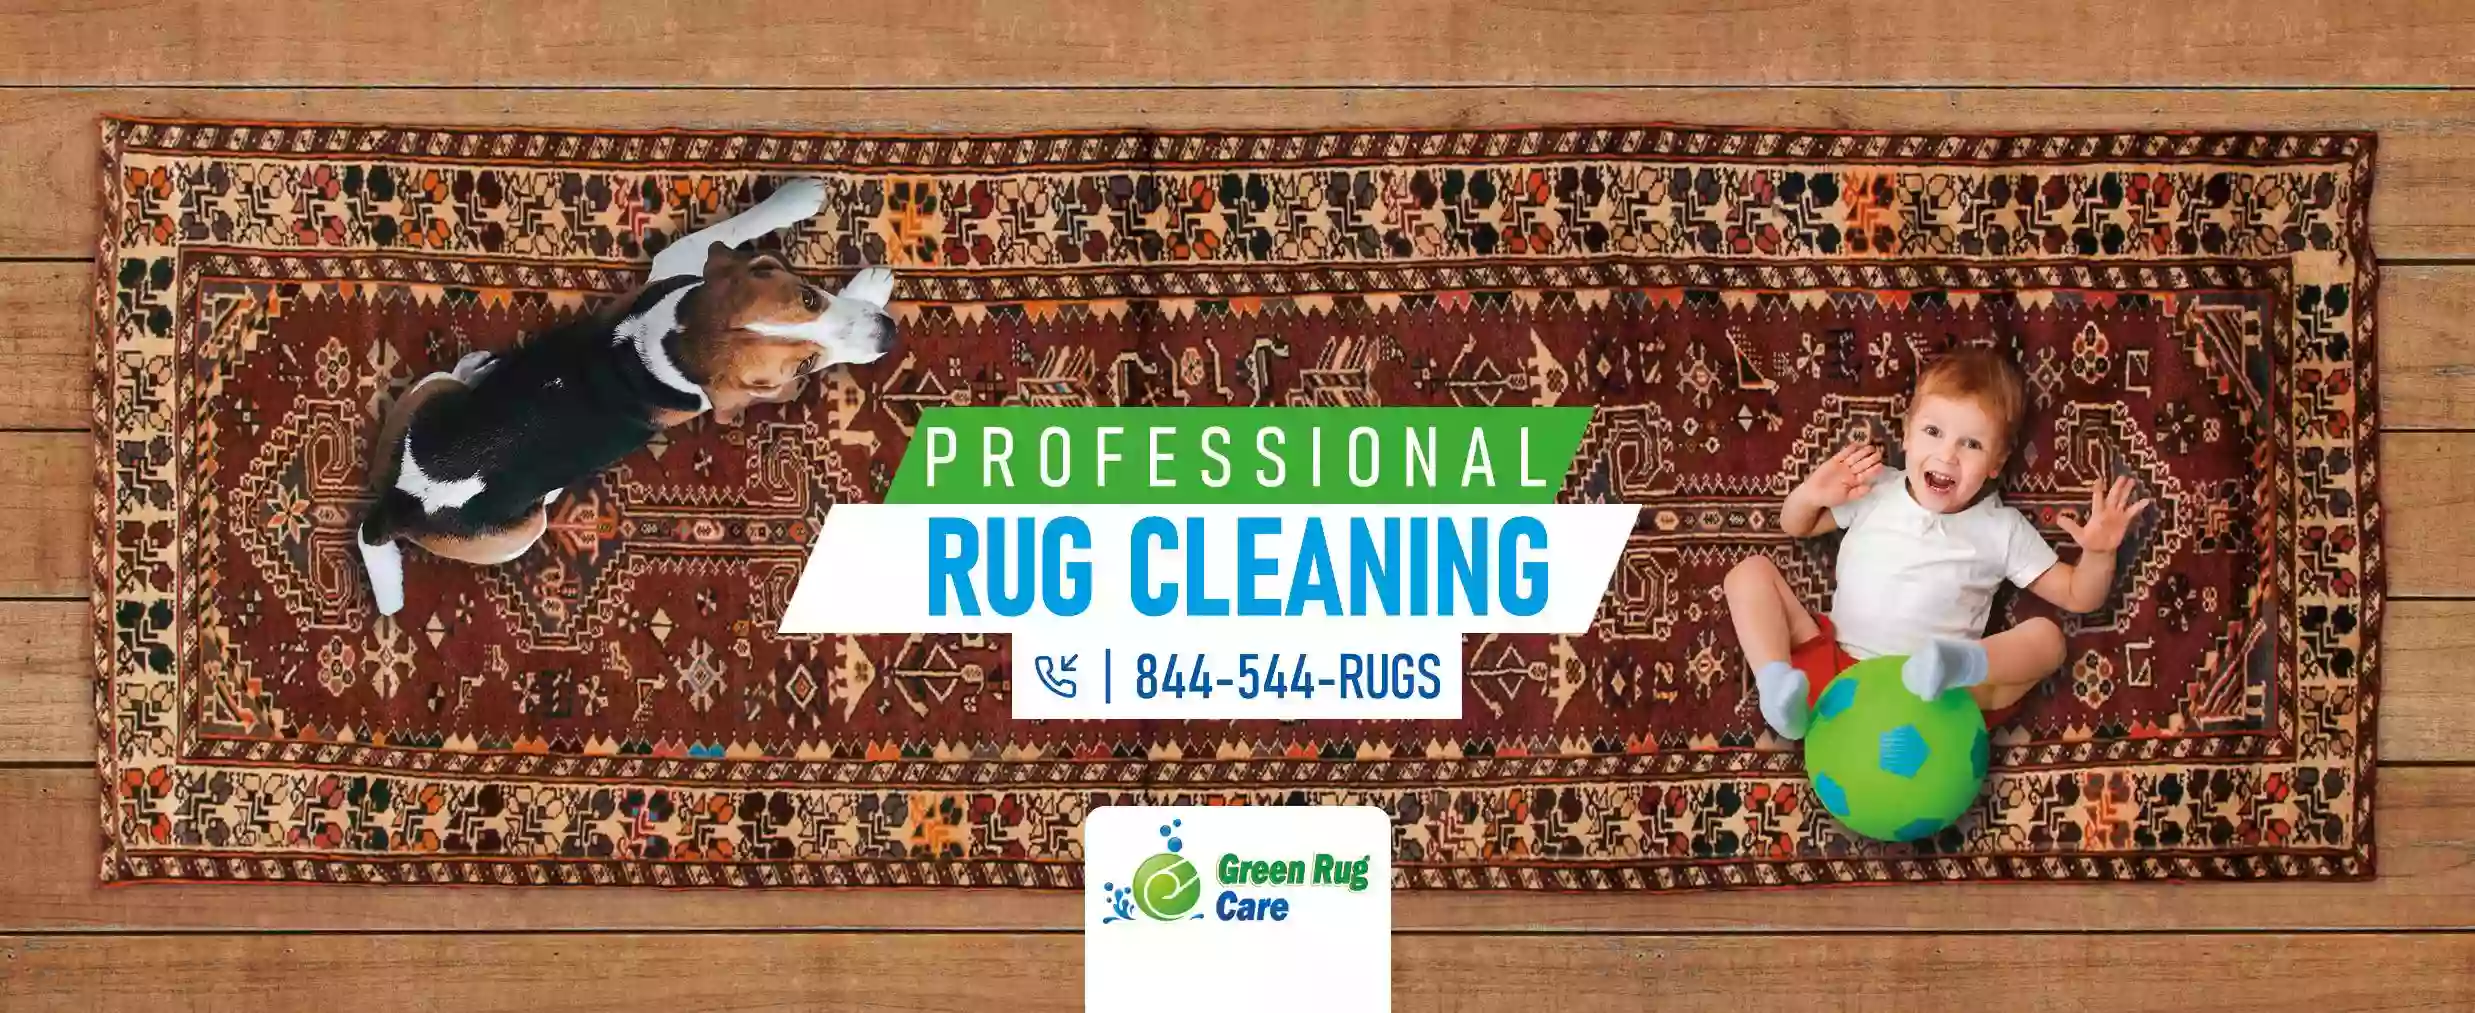 Green Rug Care, Rug Cleaning & Repairs